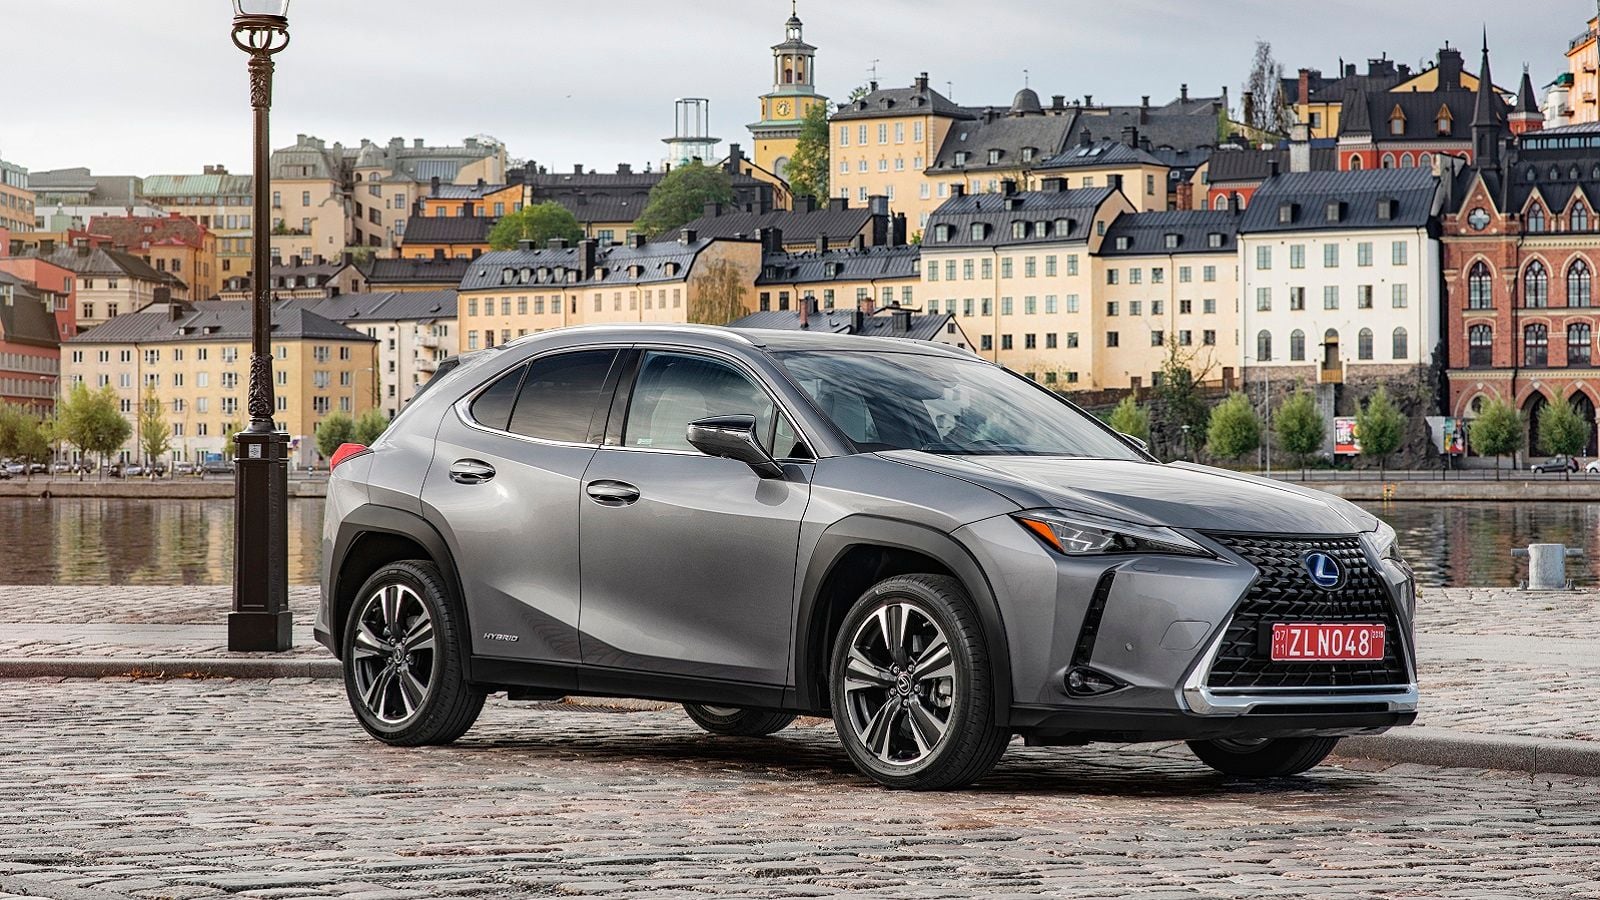 Lexus Launching Subscription Service in Select Cities